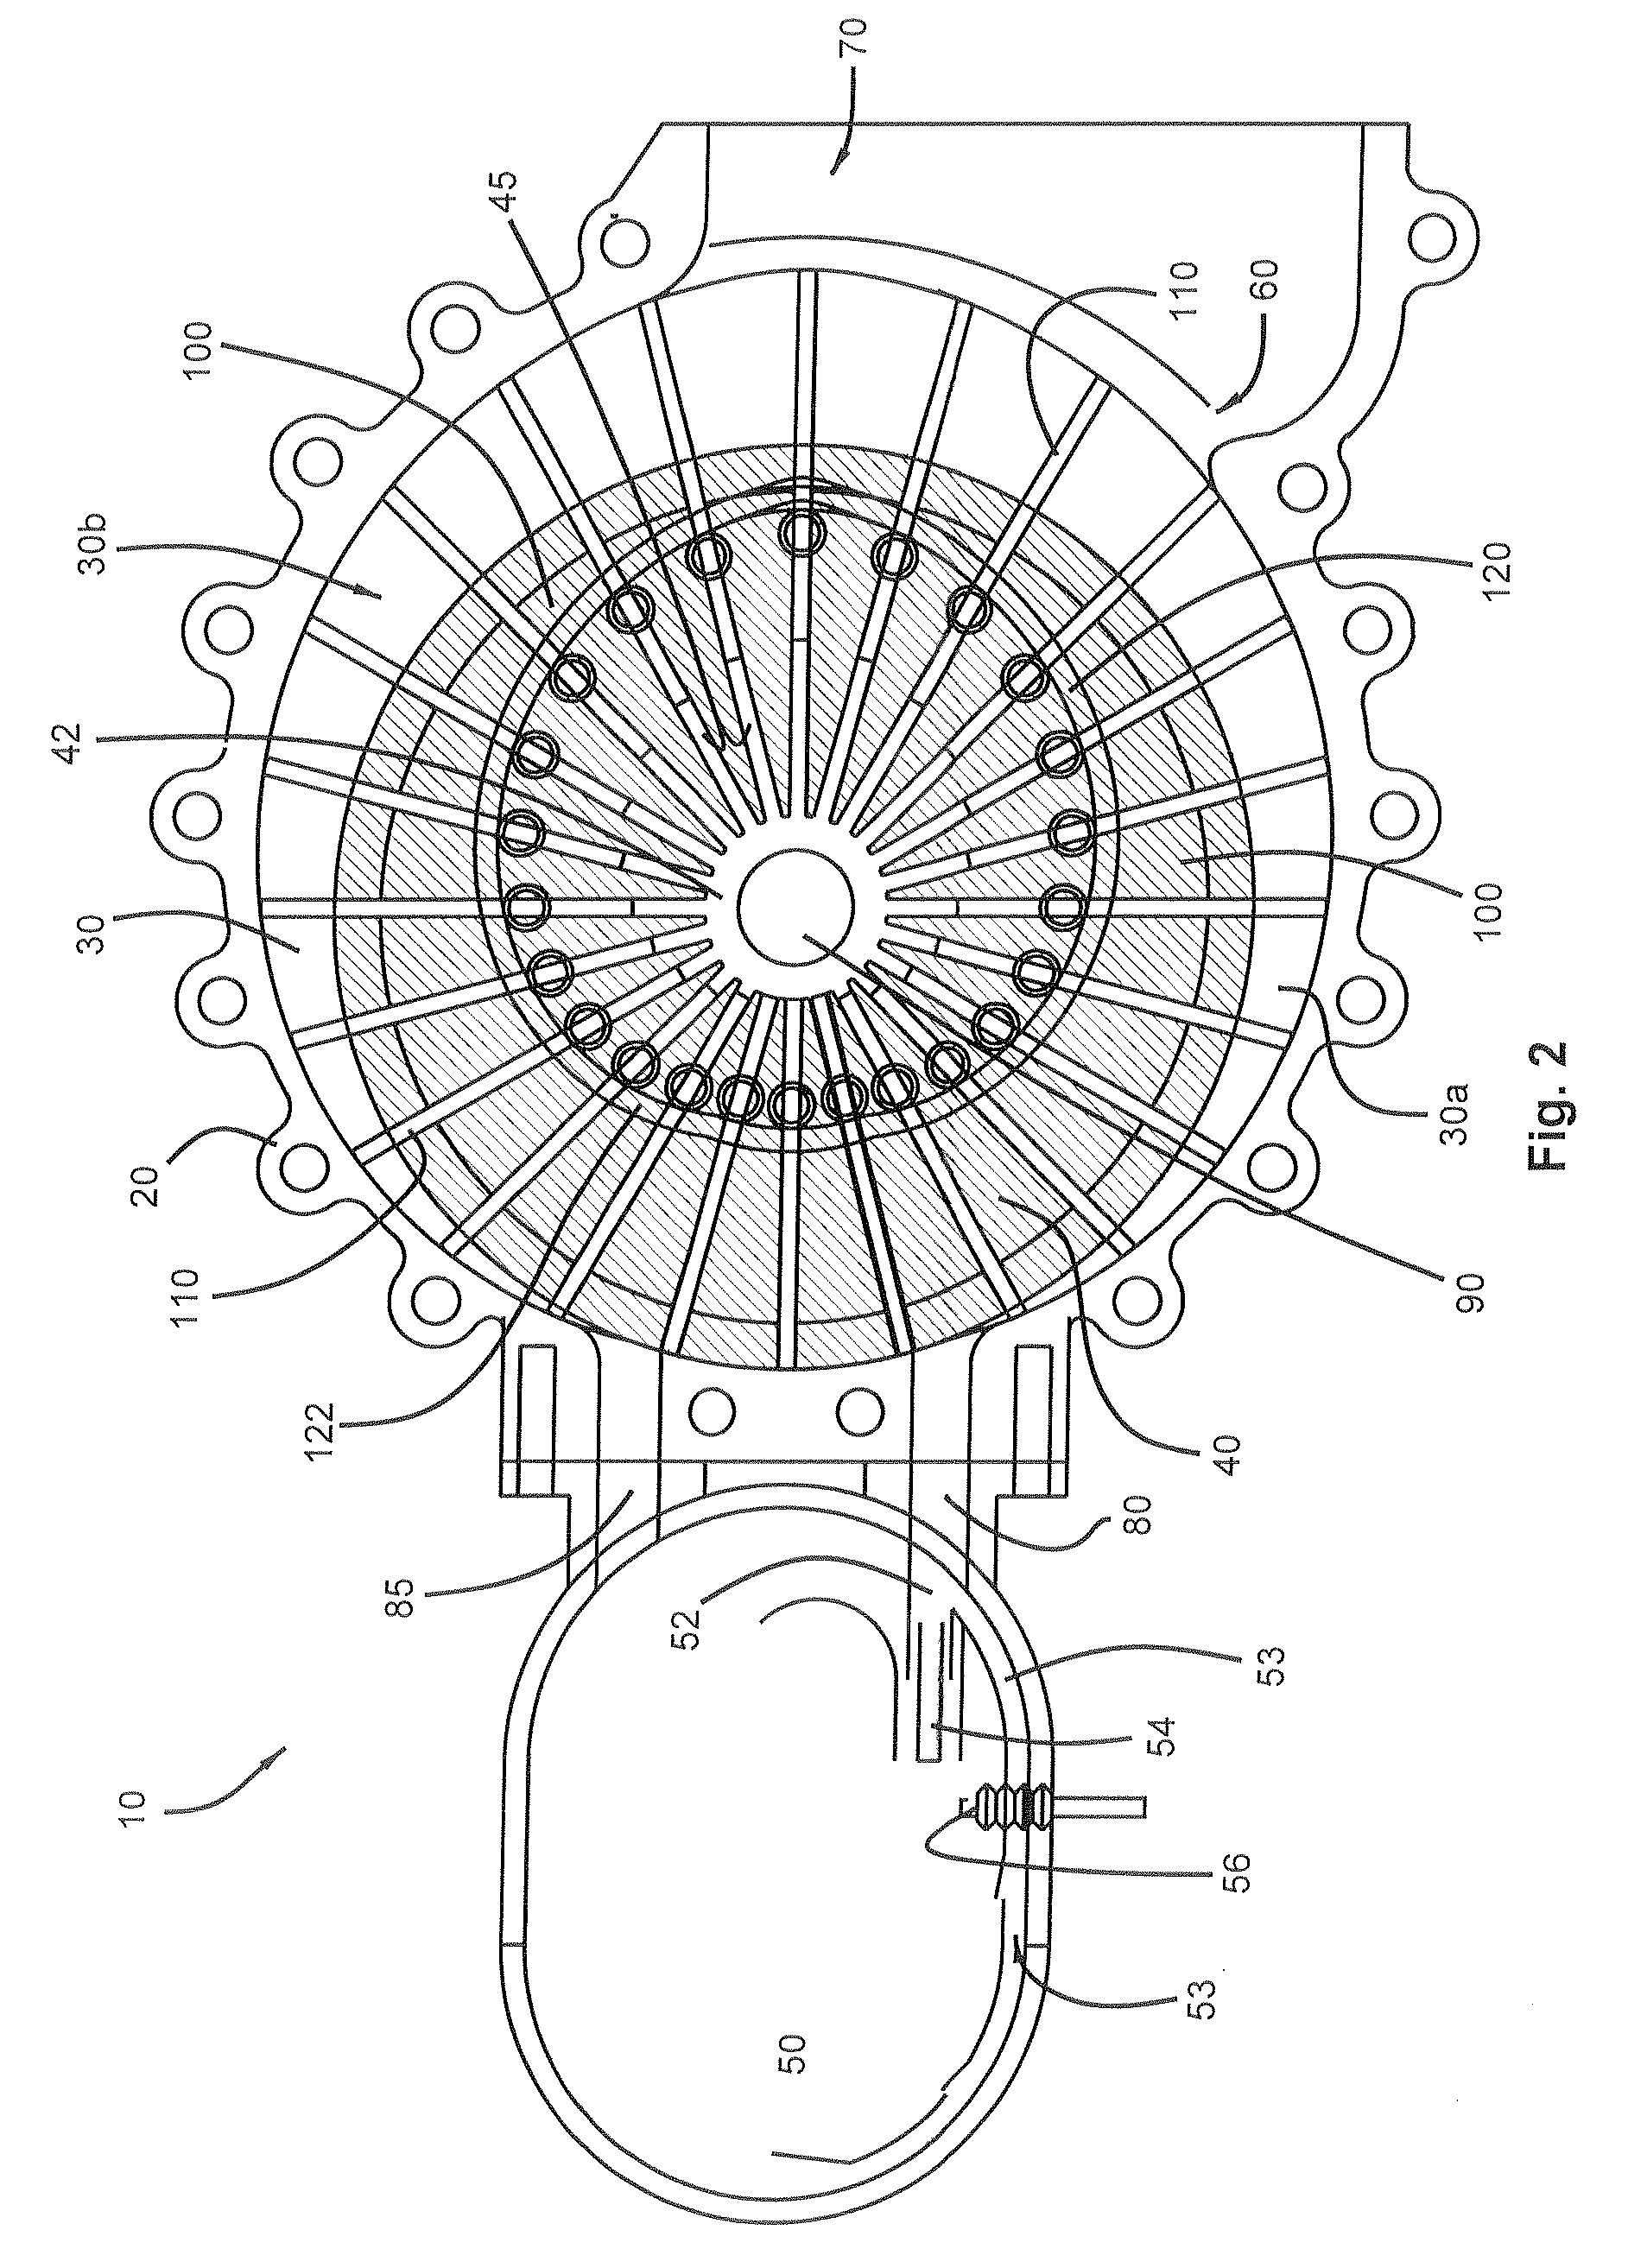 Positive displacement rotary vane engine